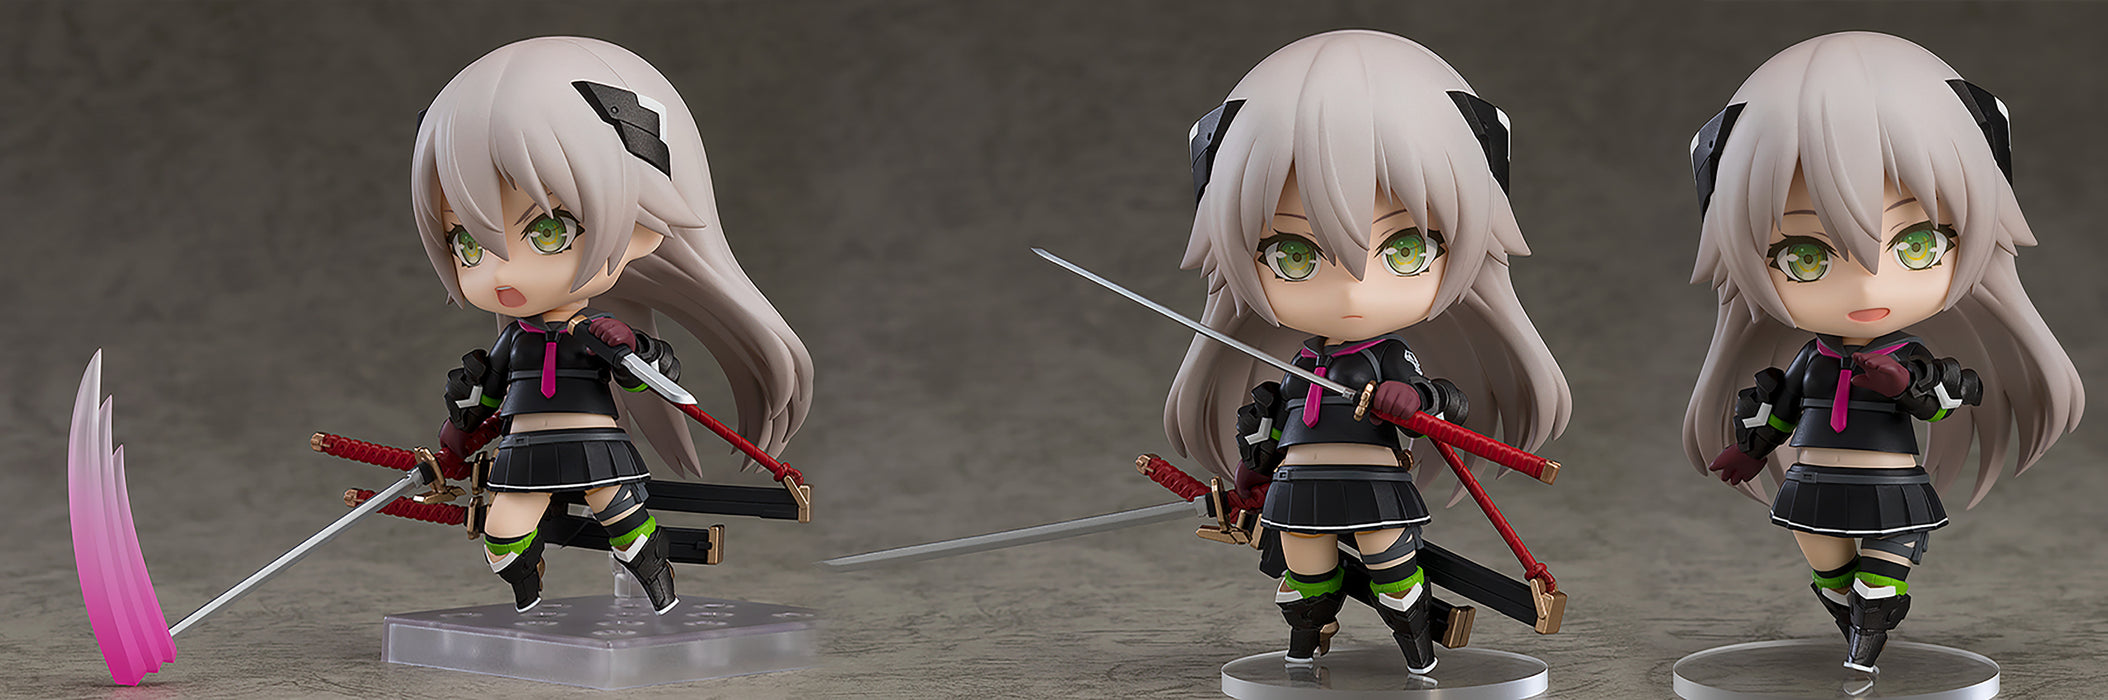 Good Smile Heavily Armed High School Girls - Ichi Nendoroid - Sure Thing Toys